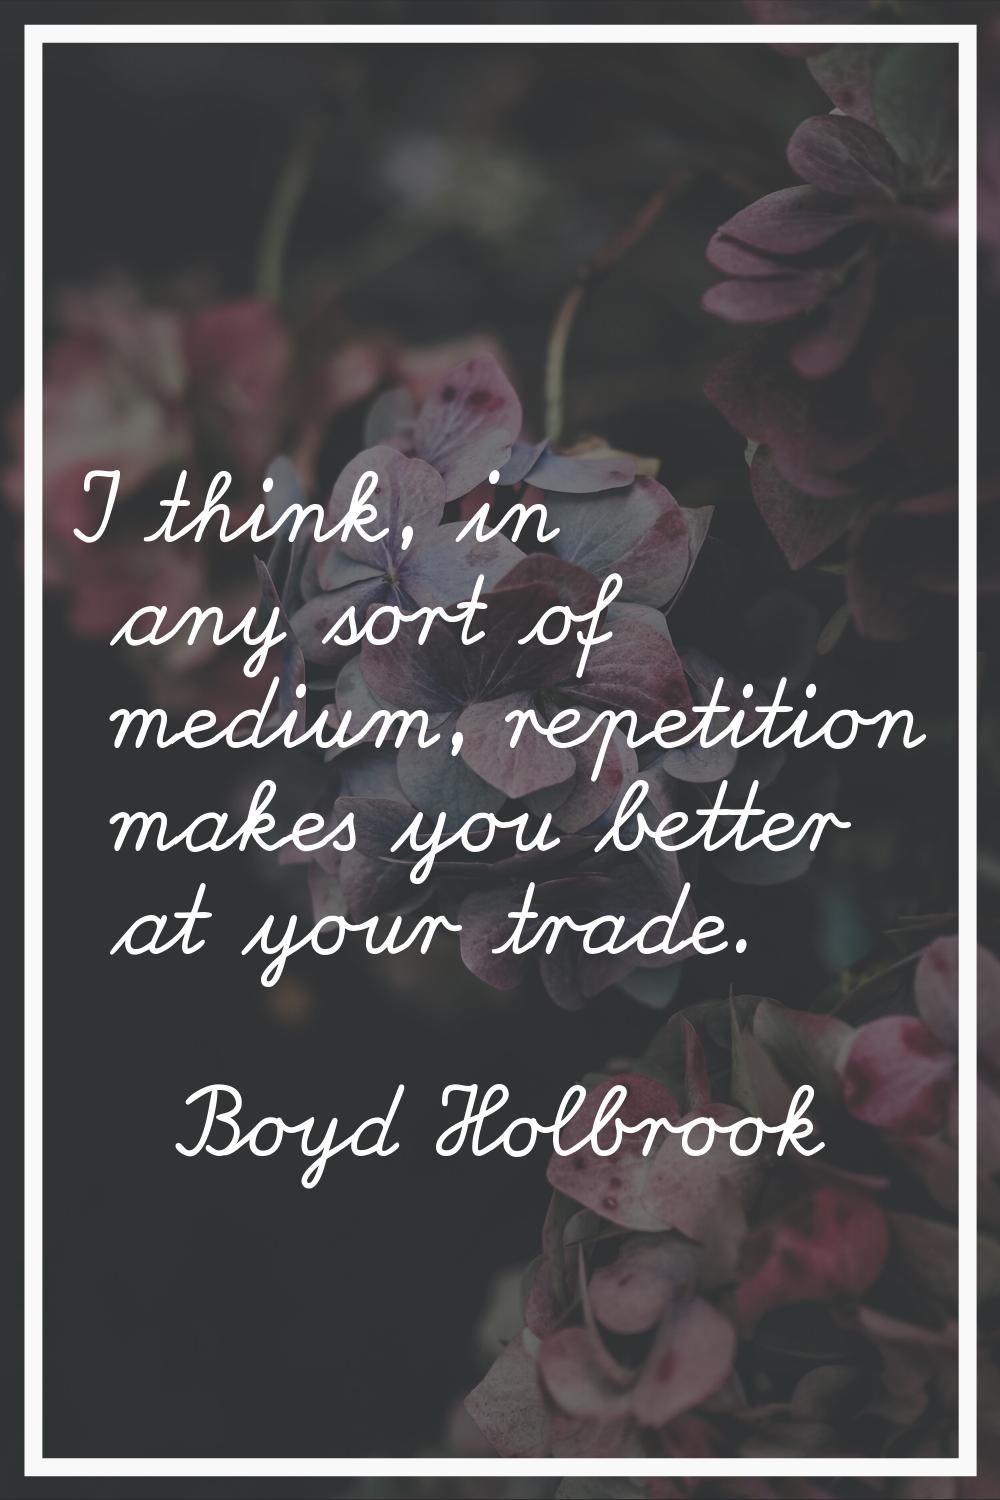 I think, in any sort of medium, repetition makes you better at your trade.